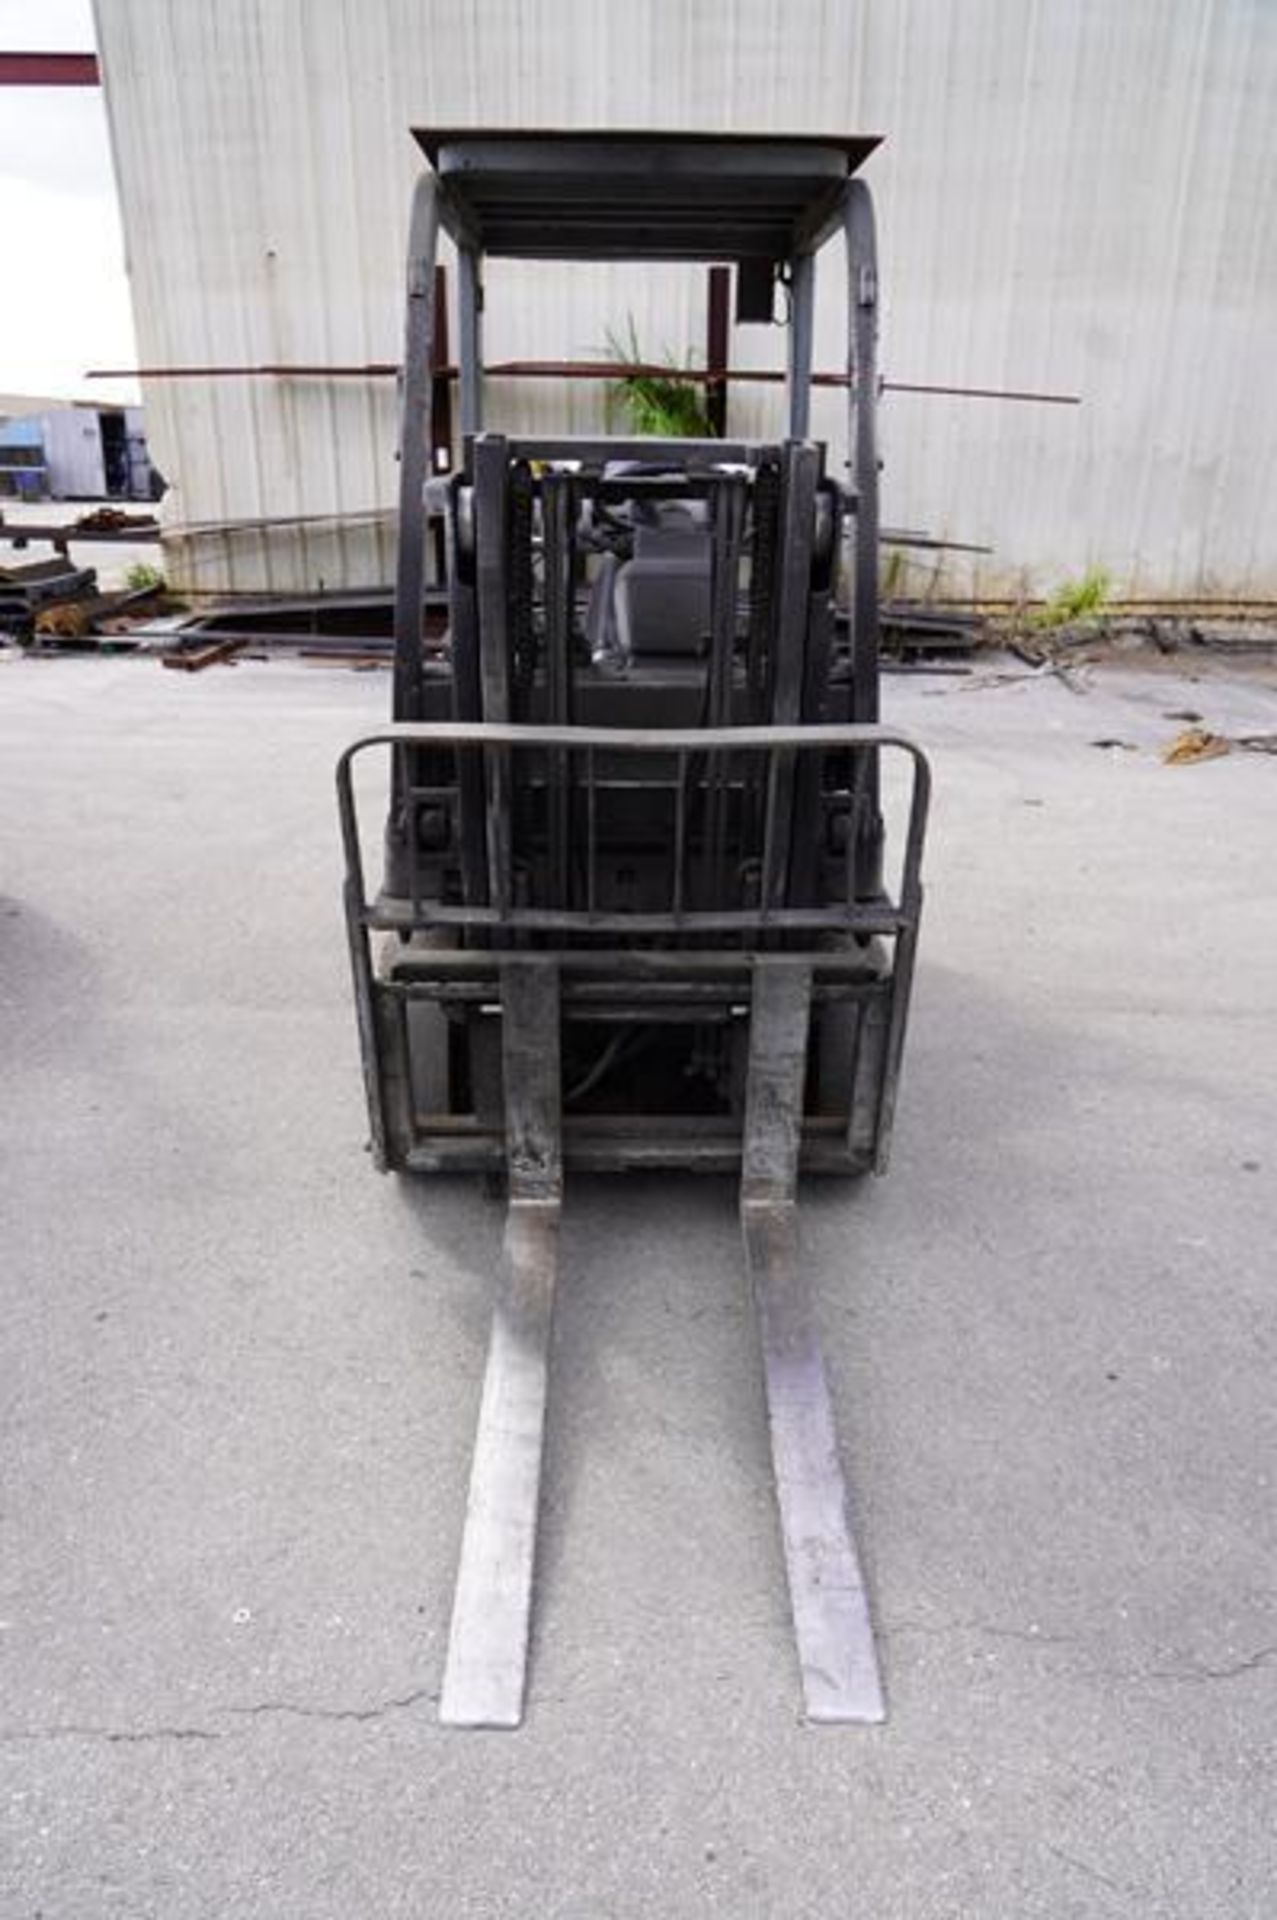 Toyota Mdl: 7FGU18 3,500 Lbs Propane Forklift, 3,500 Lbs Lift Capacity, Load Center 24'', Lift Speed - Image 4 of 10